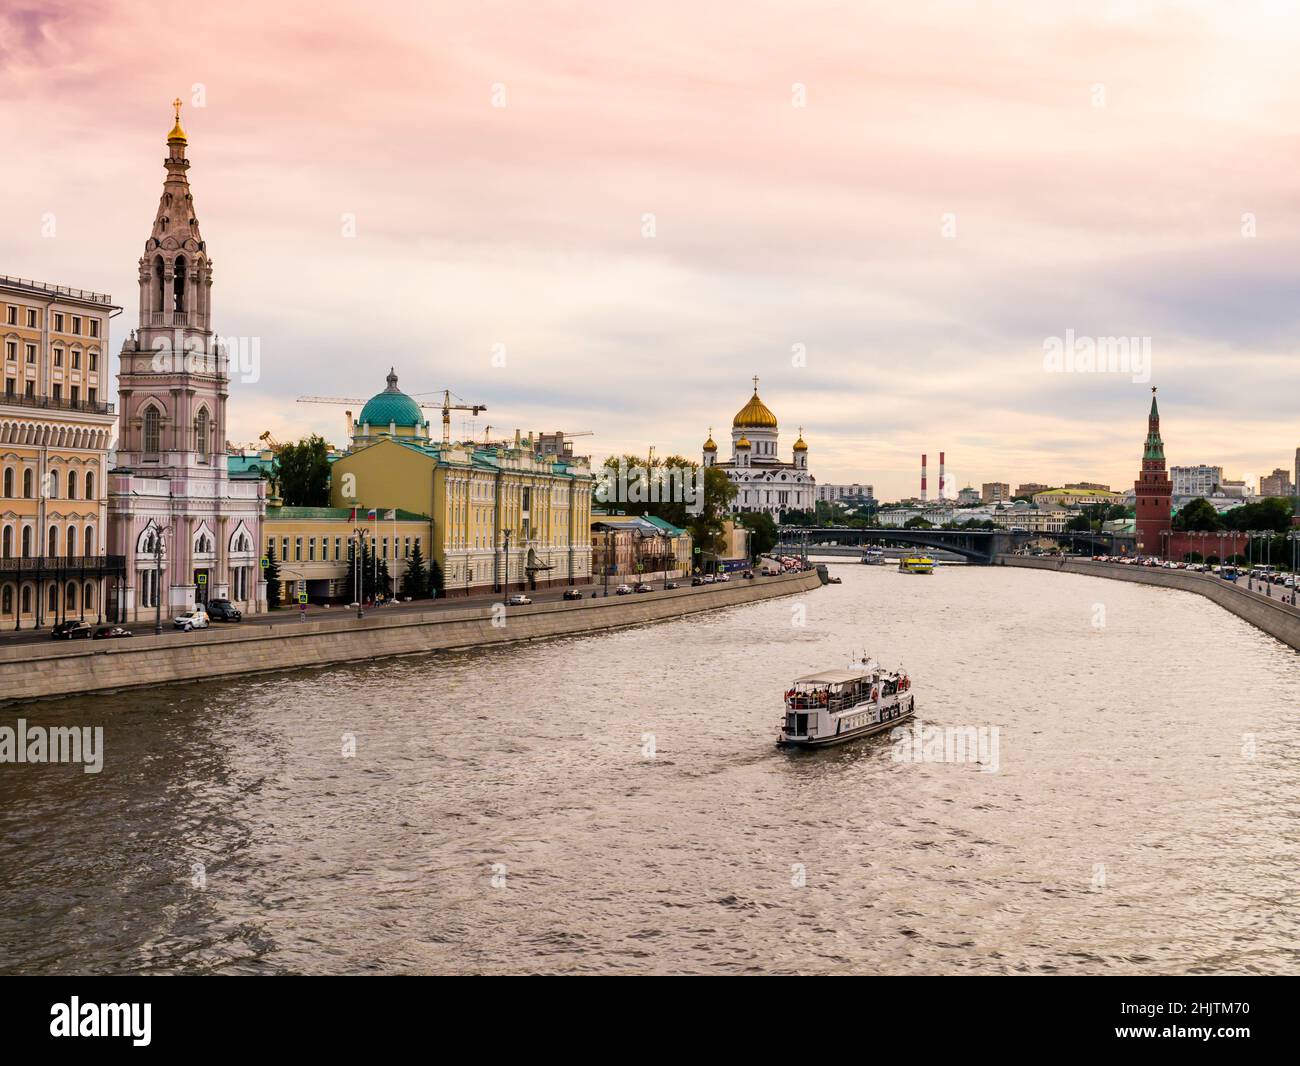 Russia, stunning view of Moscow city center at sunset, with kremlin, cathedral of Christ the Saviour and Moskva river Stock Photo